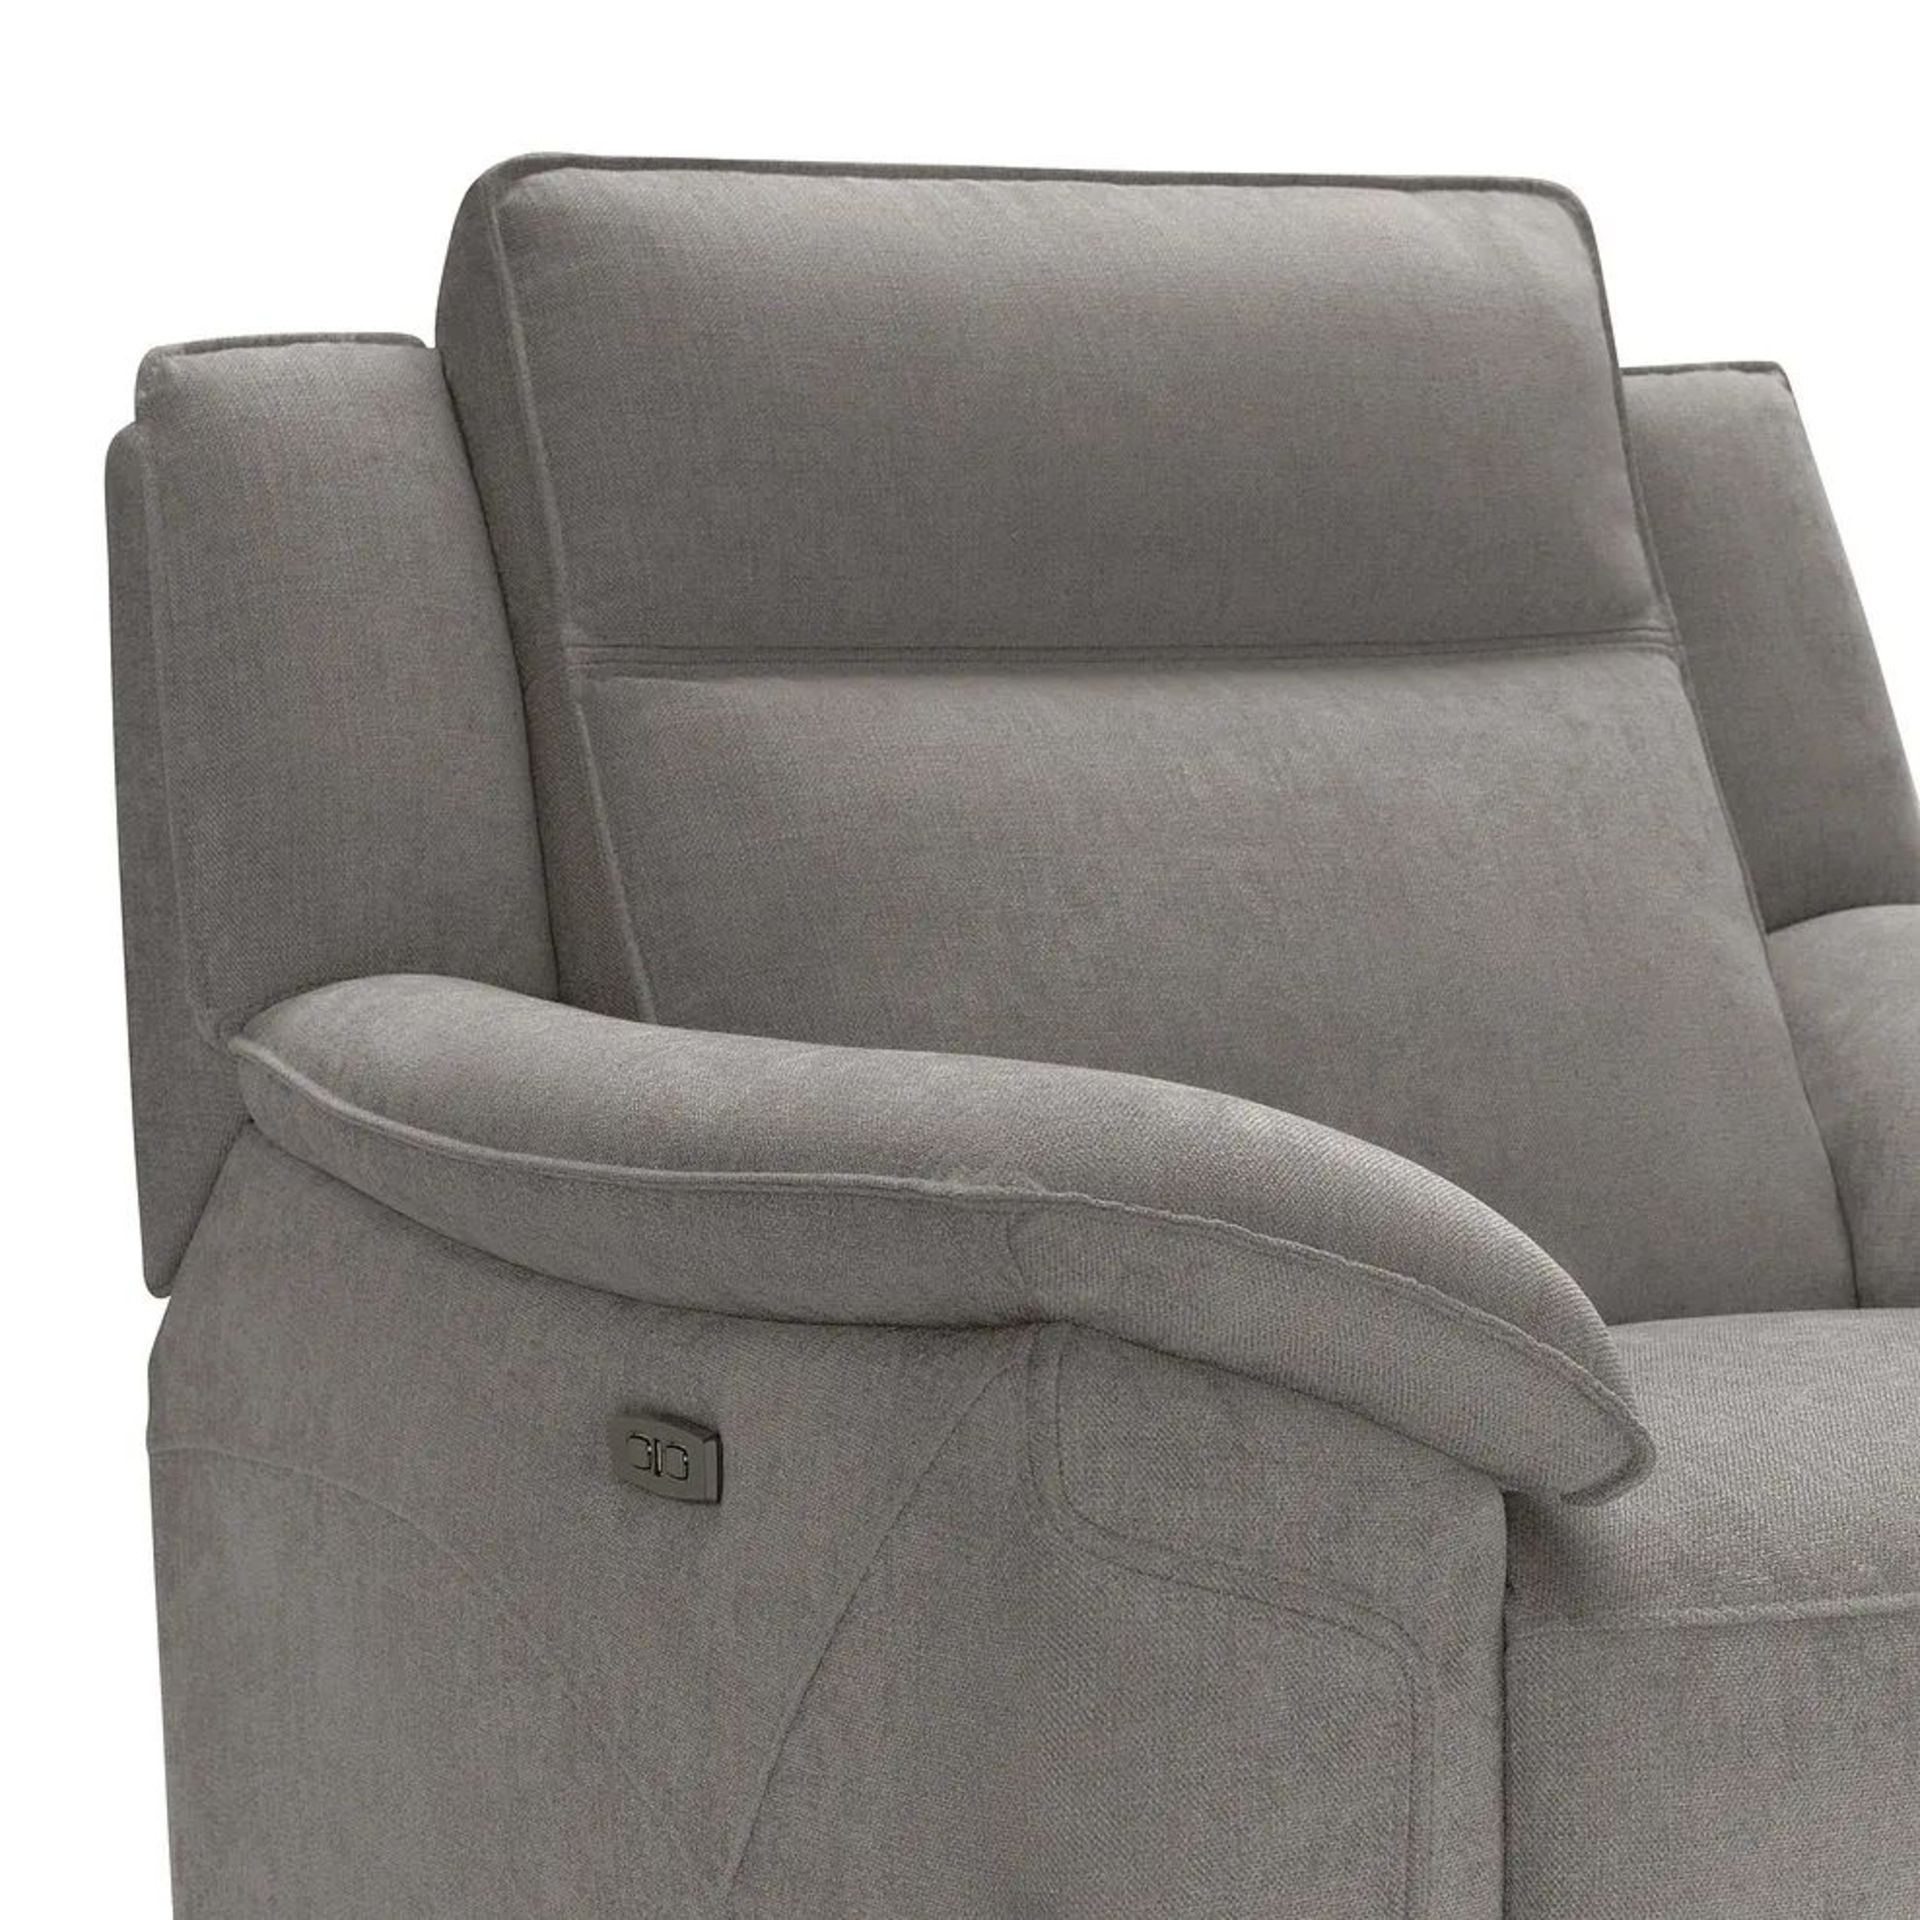 BRAND NEW DUNE Electric Recliner Armchair with Power Headrest - AMIGO GRANITE FABRIC. RRP £1099. - Image 11 of 12